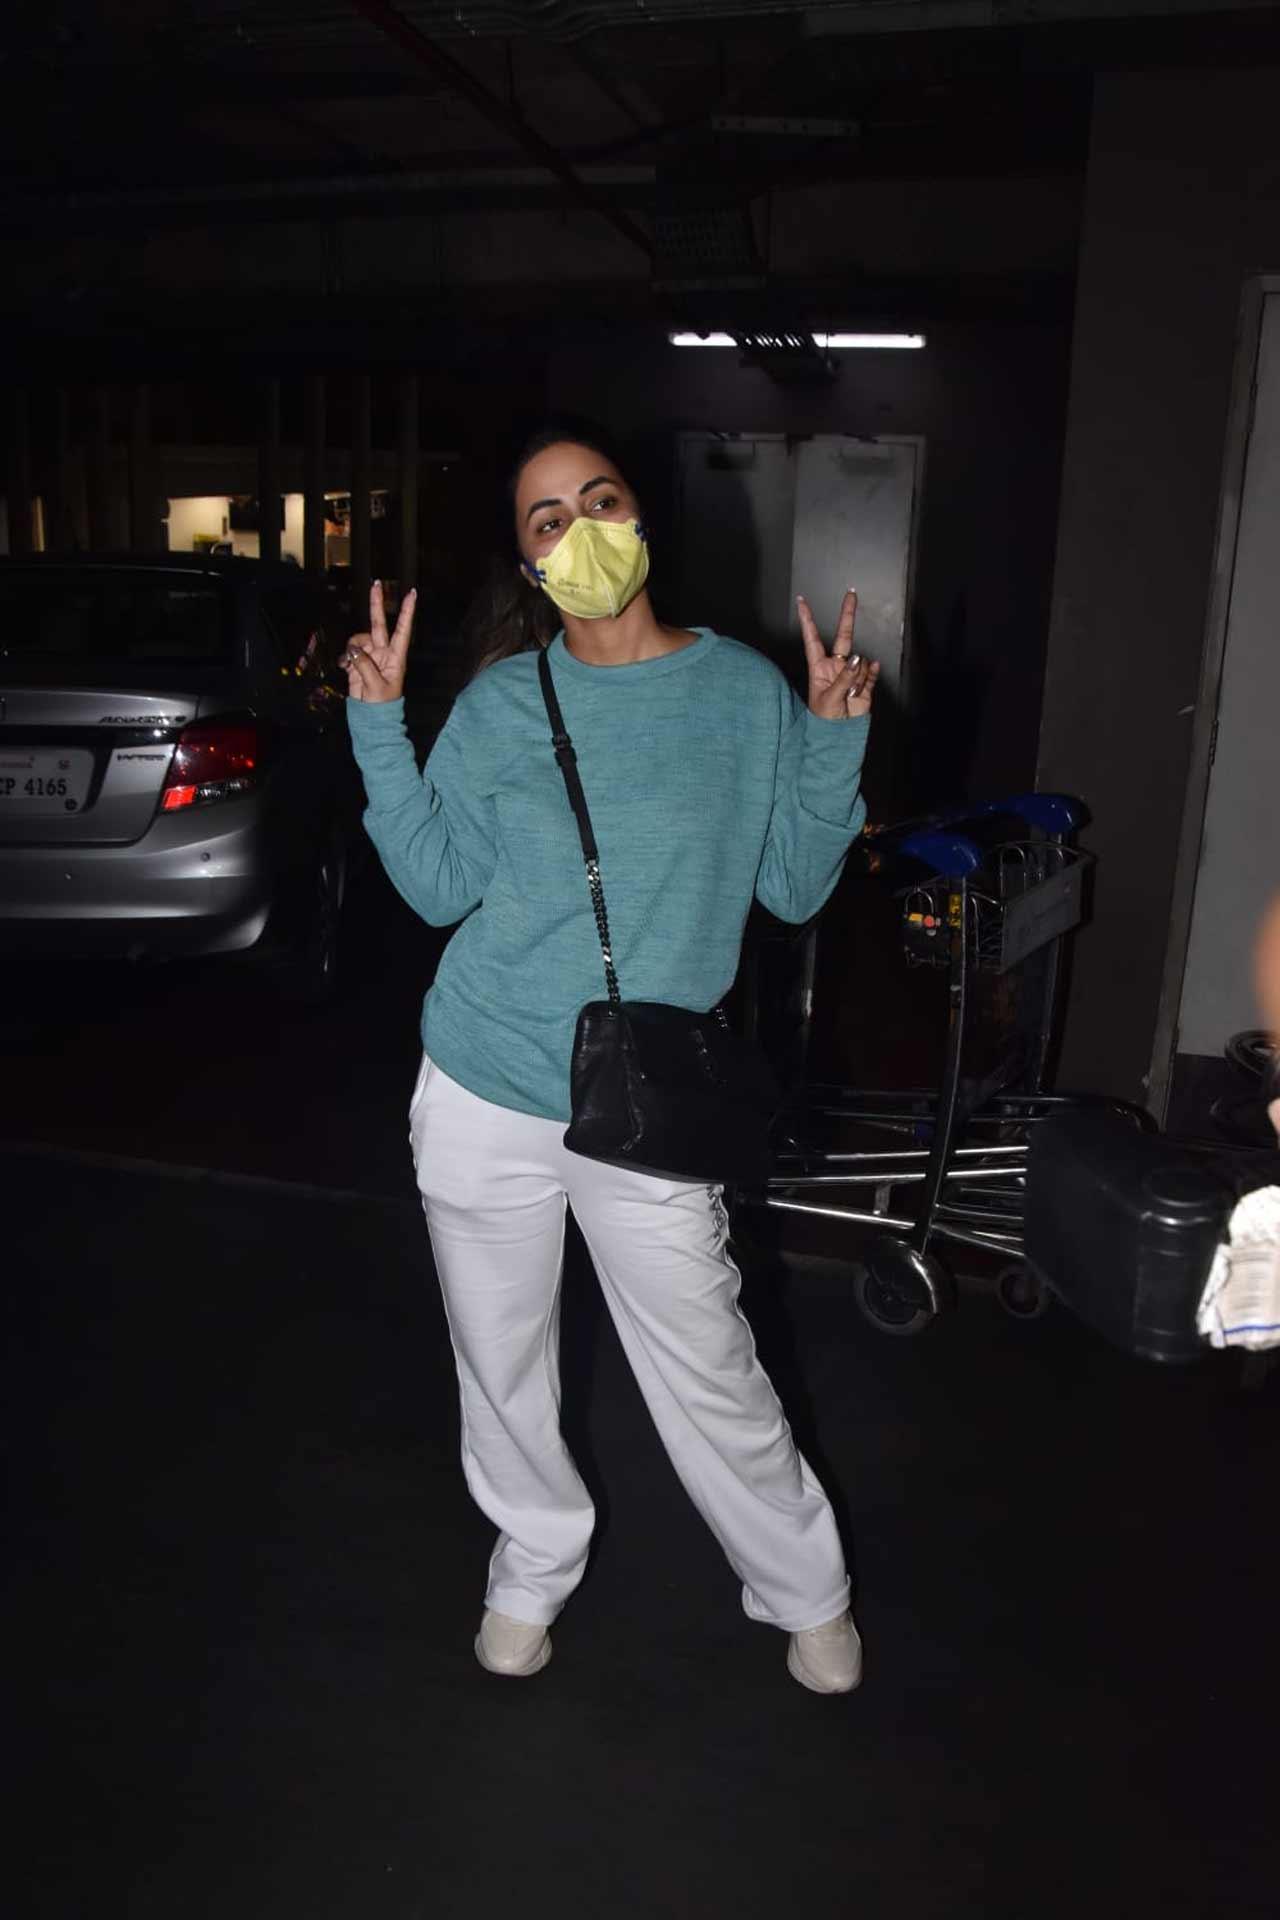 Hina Khan let off all her guards when clicked at the Mumbai airport. The actress happily posed for the shutterbugs when she was snapped on January 1, 2022. Hina was seen wearing white pants, paired with a blue coloured sweatshirt during the outing.